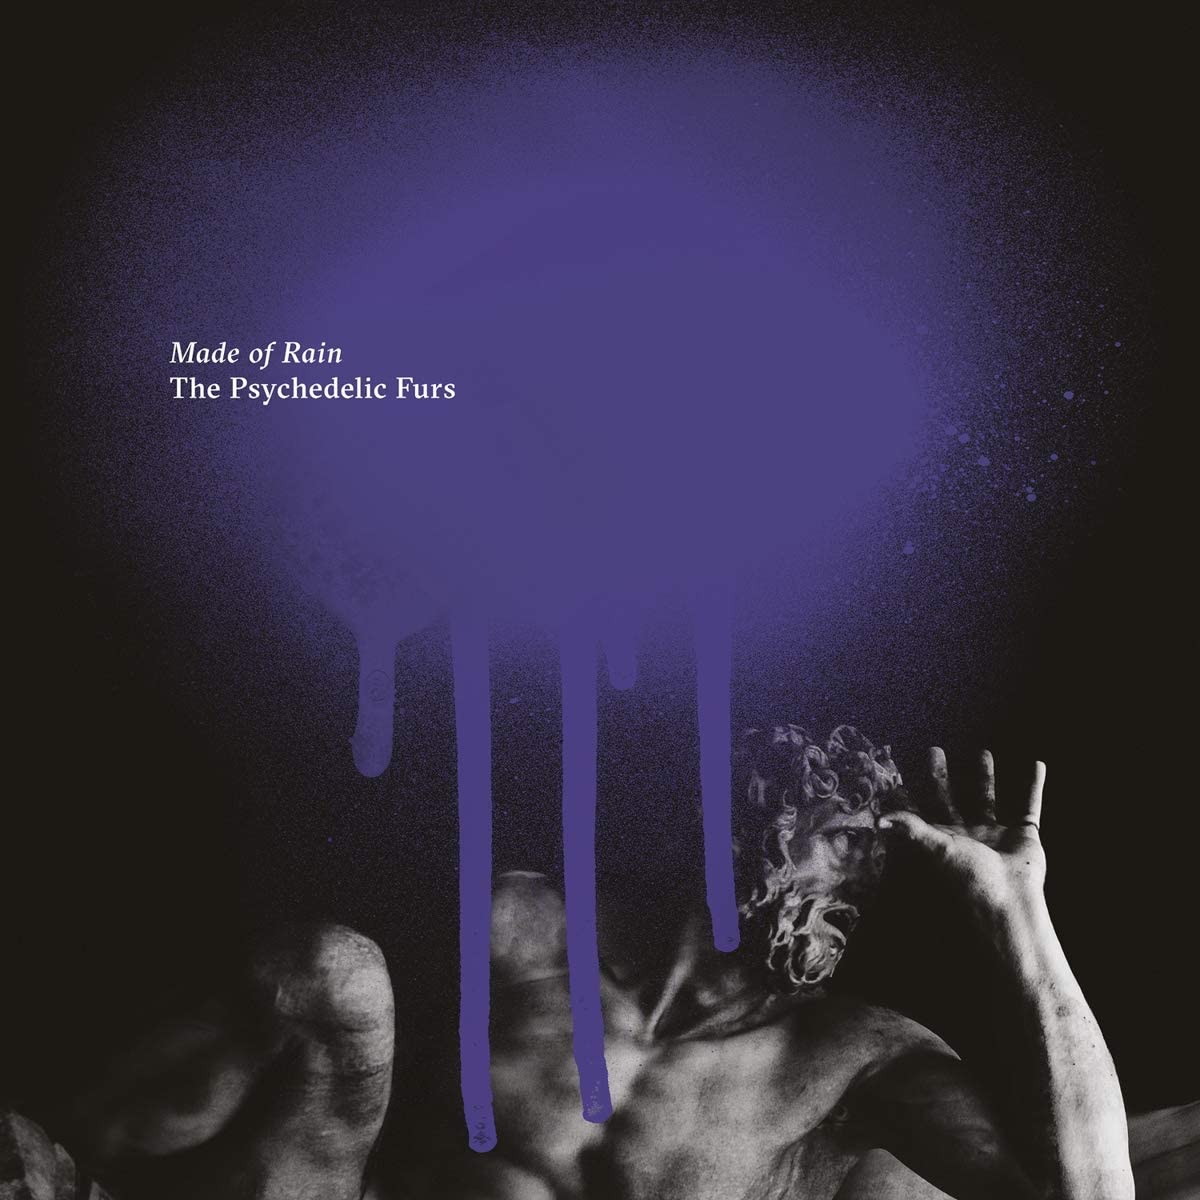 THE PSYCHEDELIC FURS - MADE OF RAIN - white vinyl